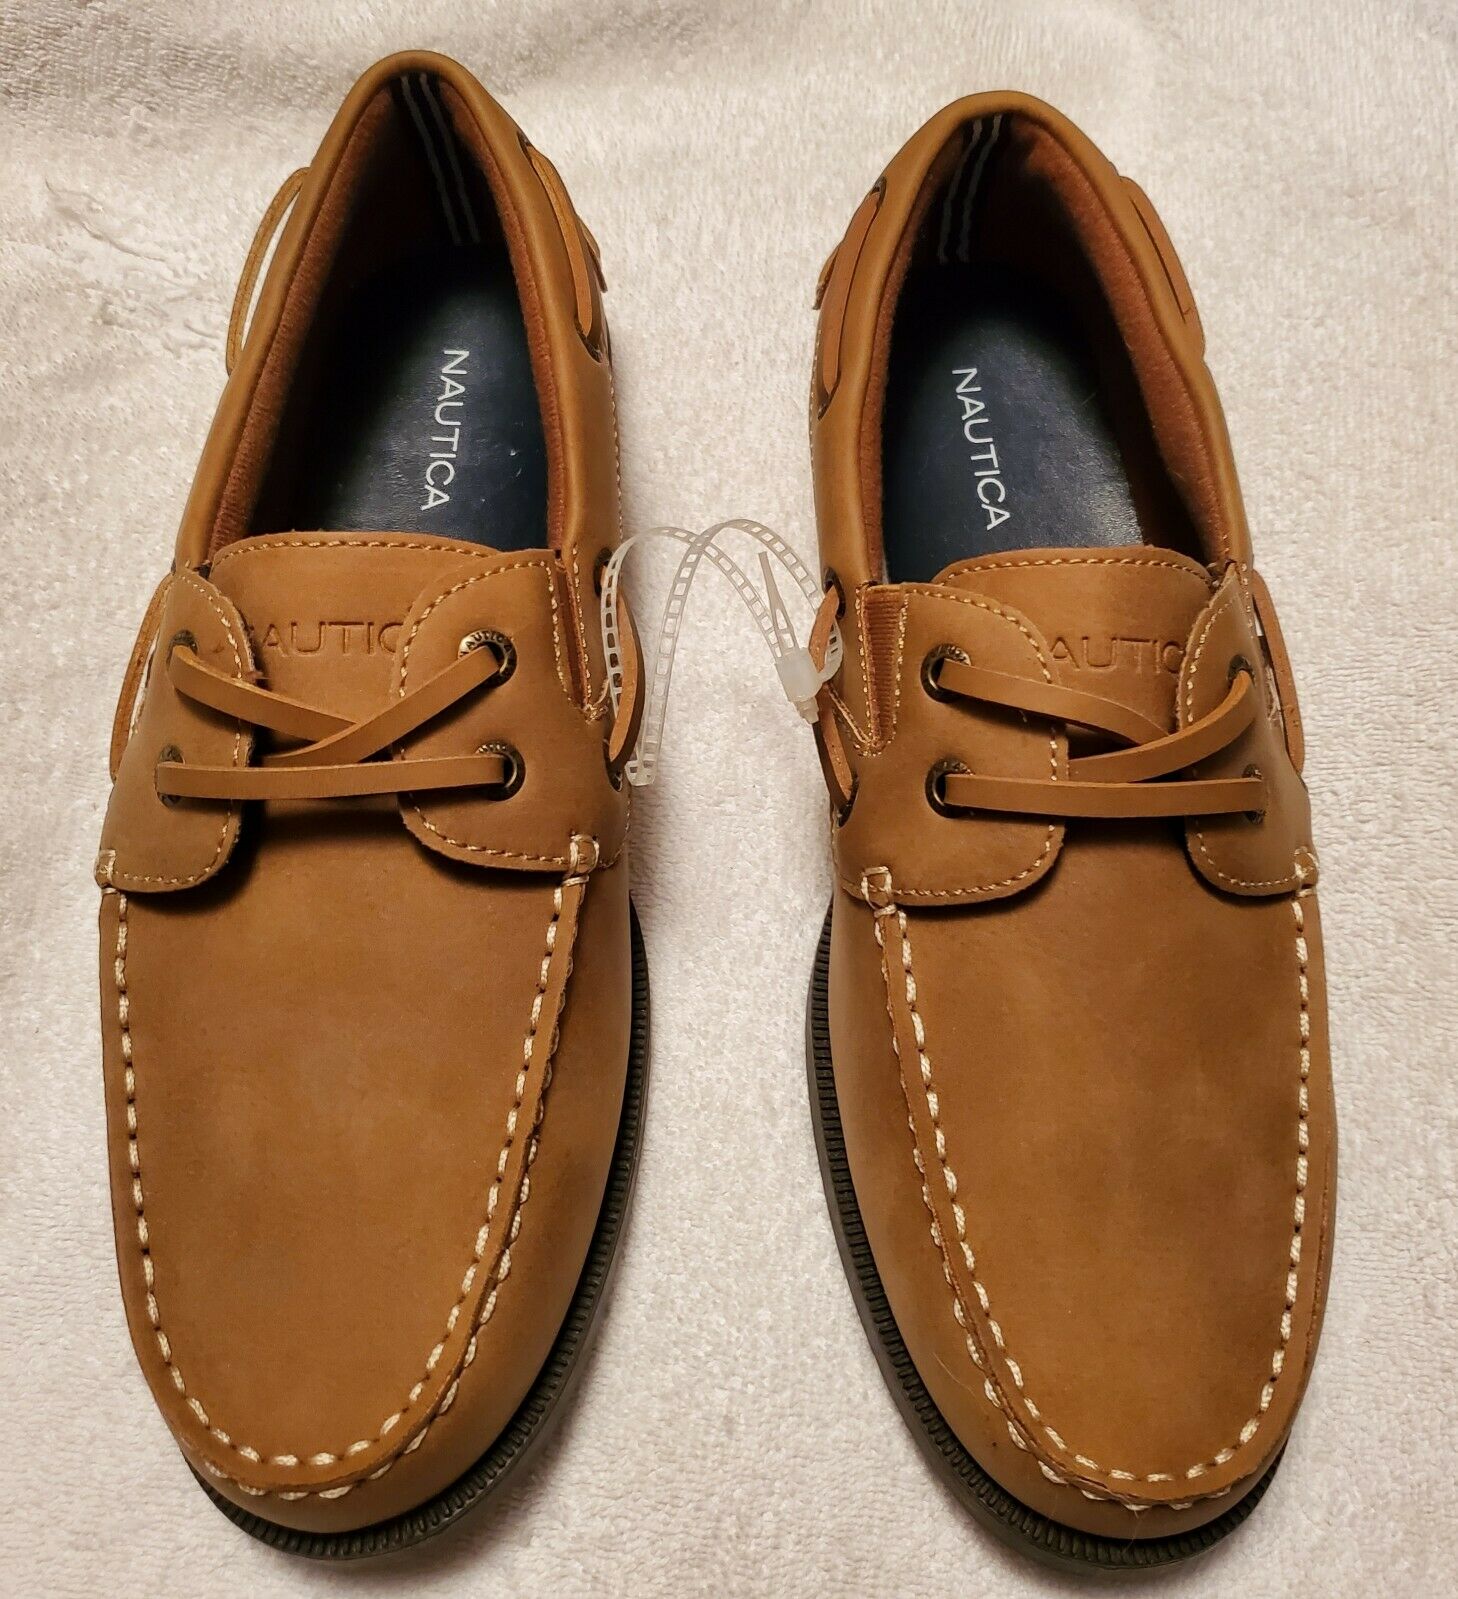 Mens Nautica boat shoes size 8.5 brown color